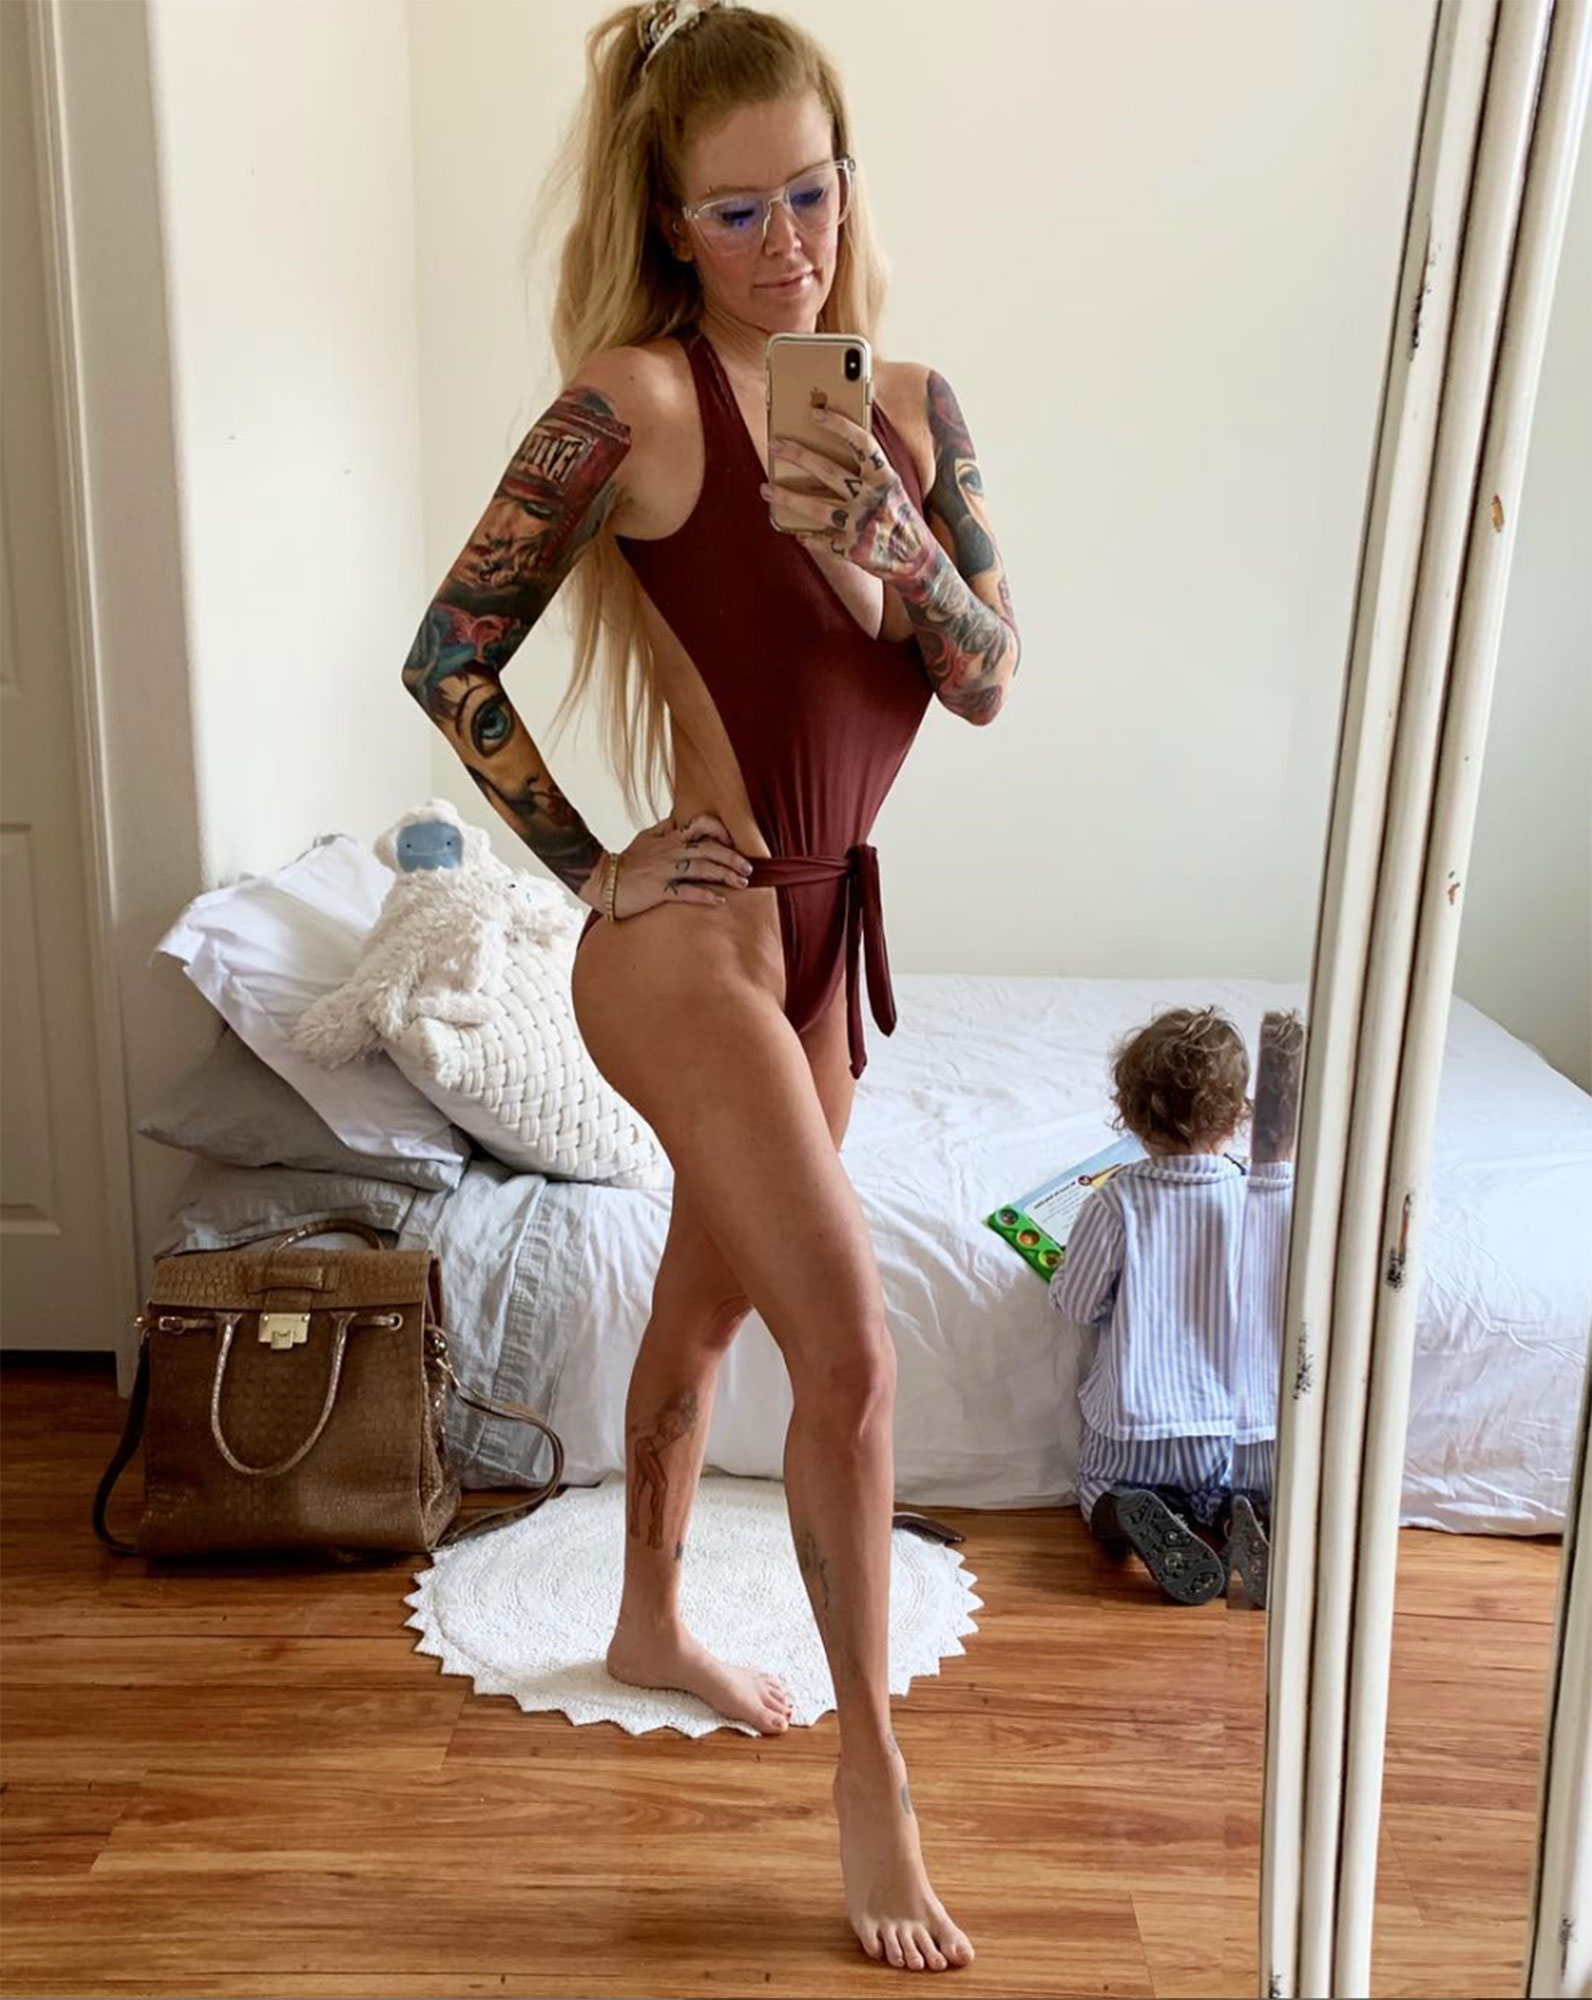 Jenna Jameson Lost 80 Pounds Post-Baby: Pictures, Diet Tips